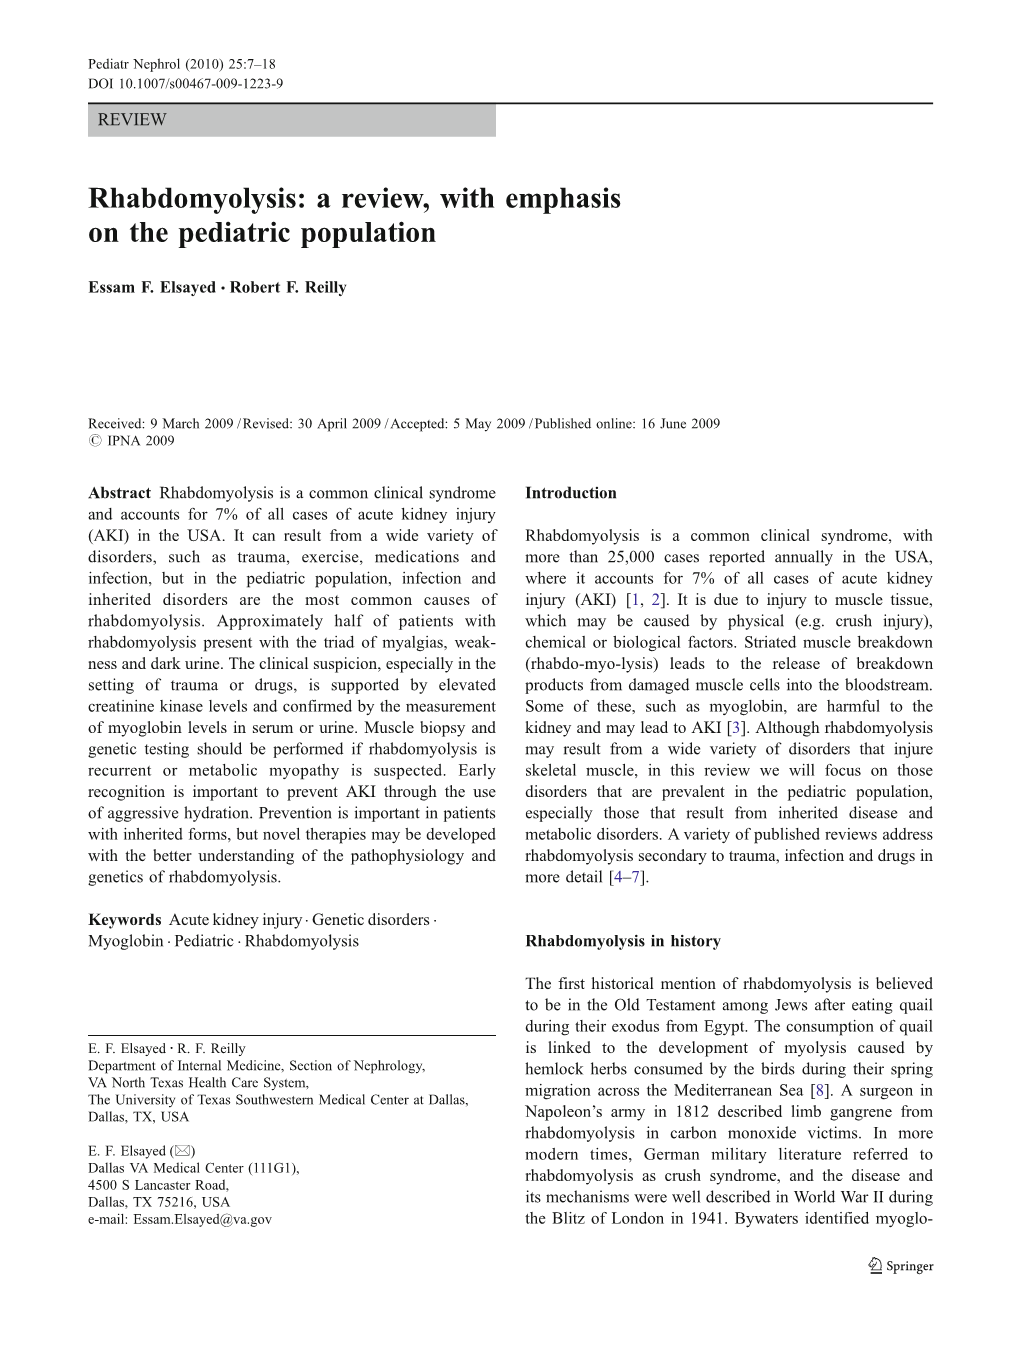 Rhabdomyolysis: a Review, with Emphasis on the Pediatric Population